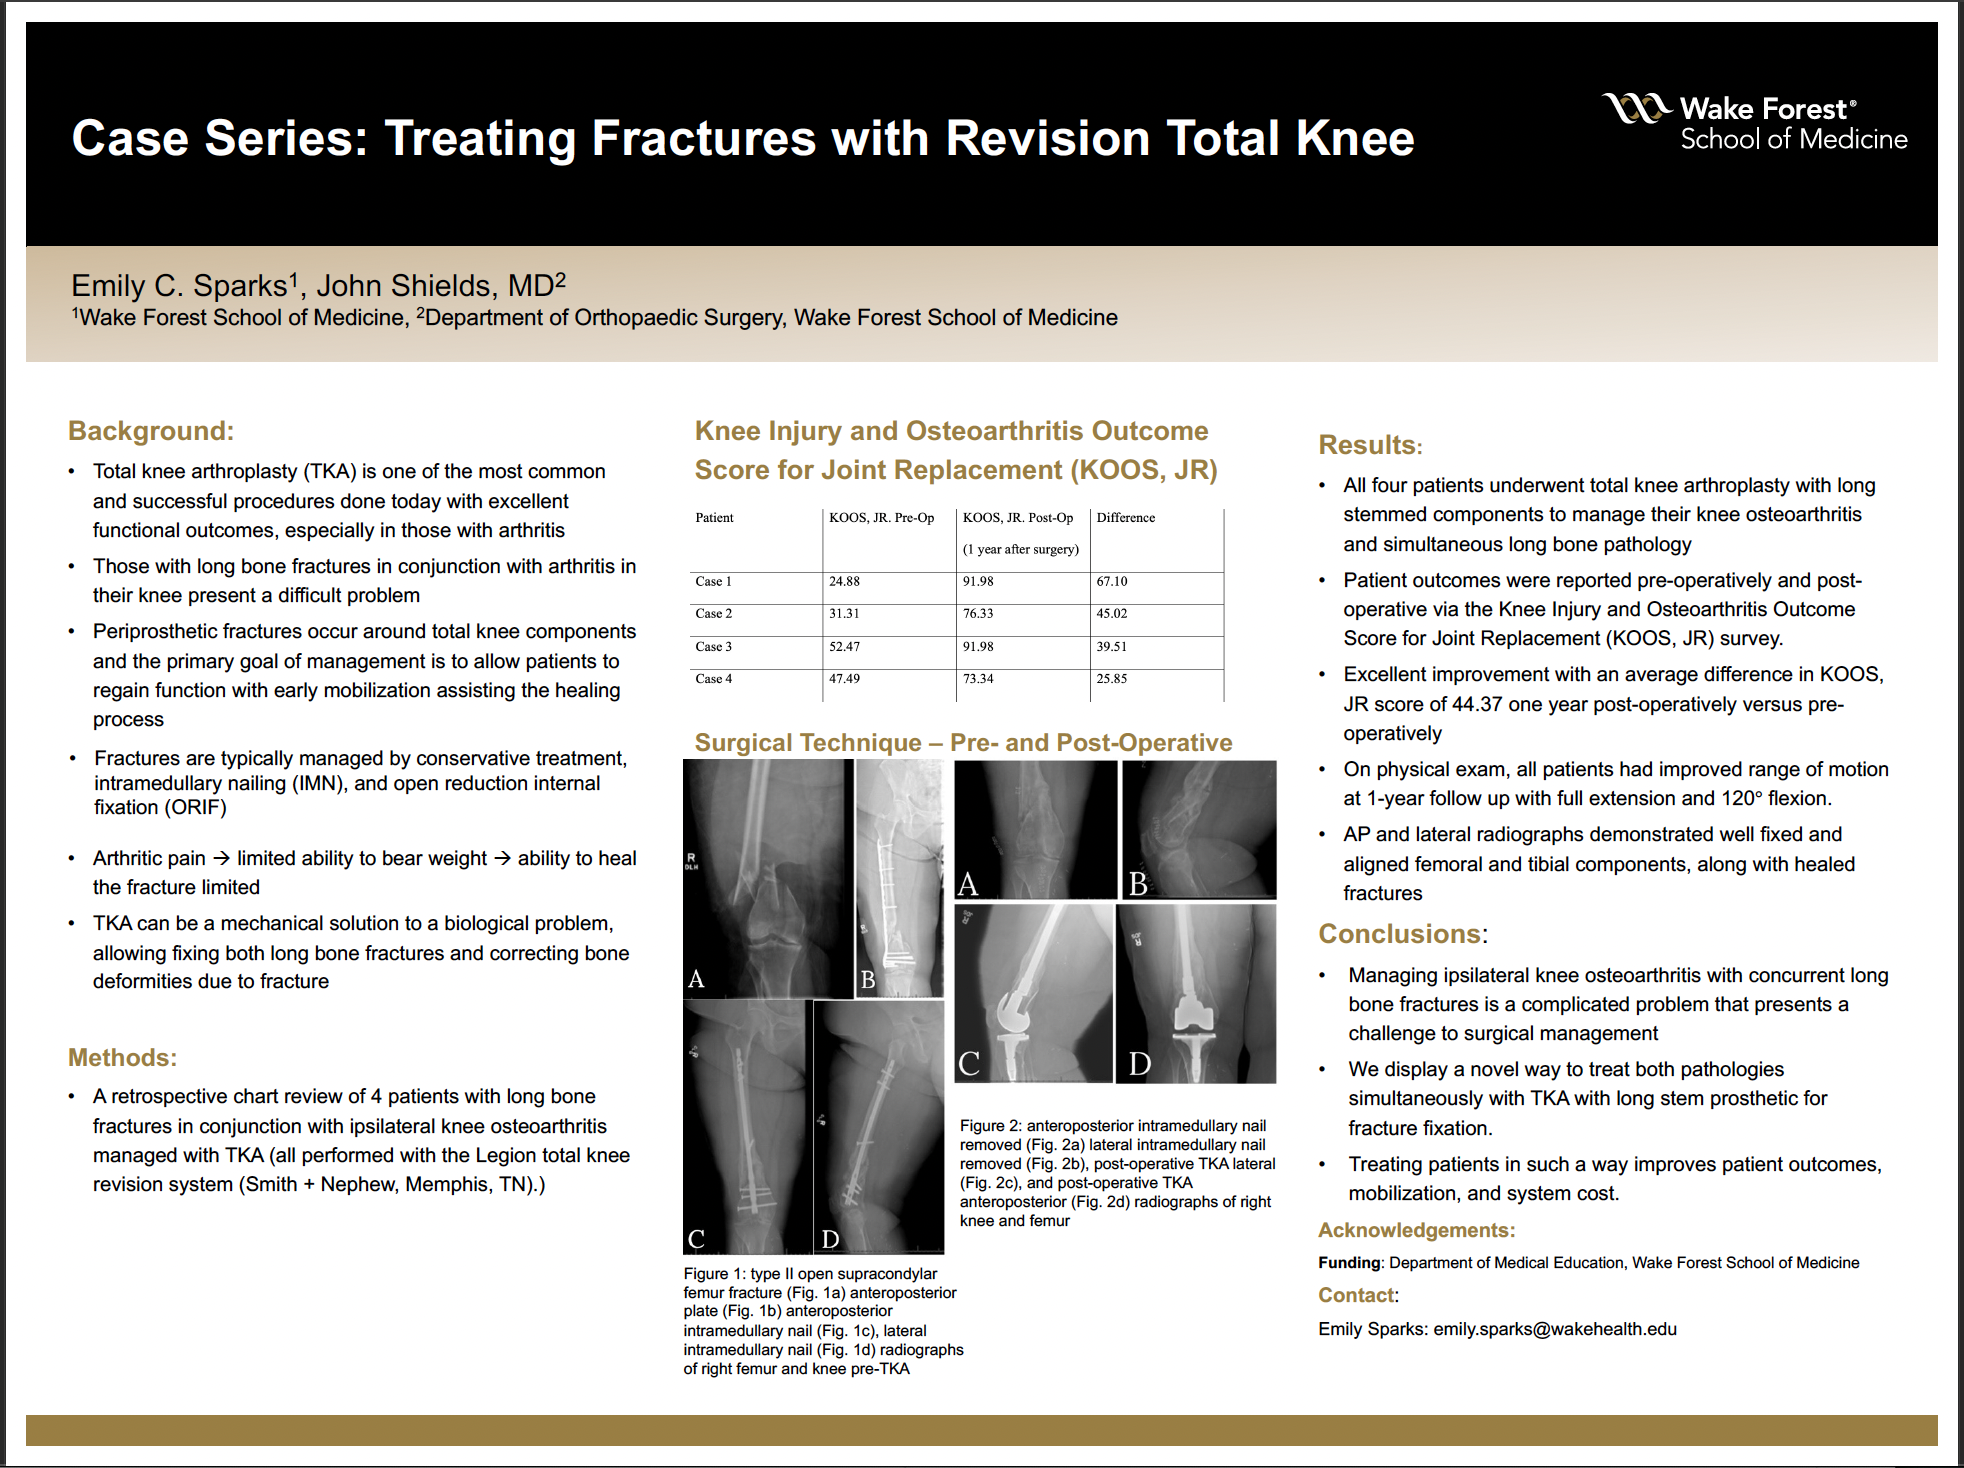 Showcase Image for Case Series: Treating Fractures with Revision Total Knee 